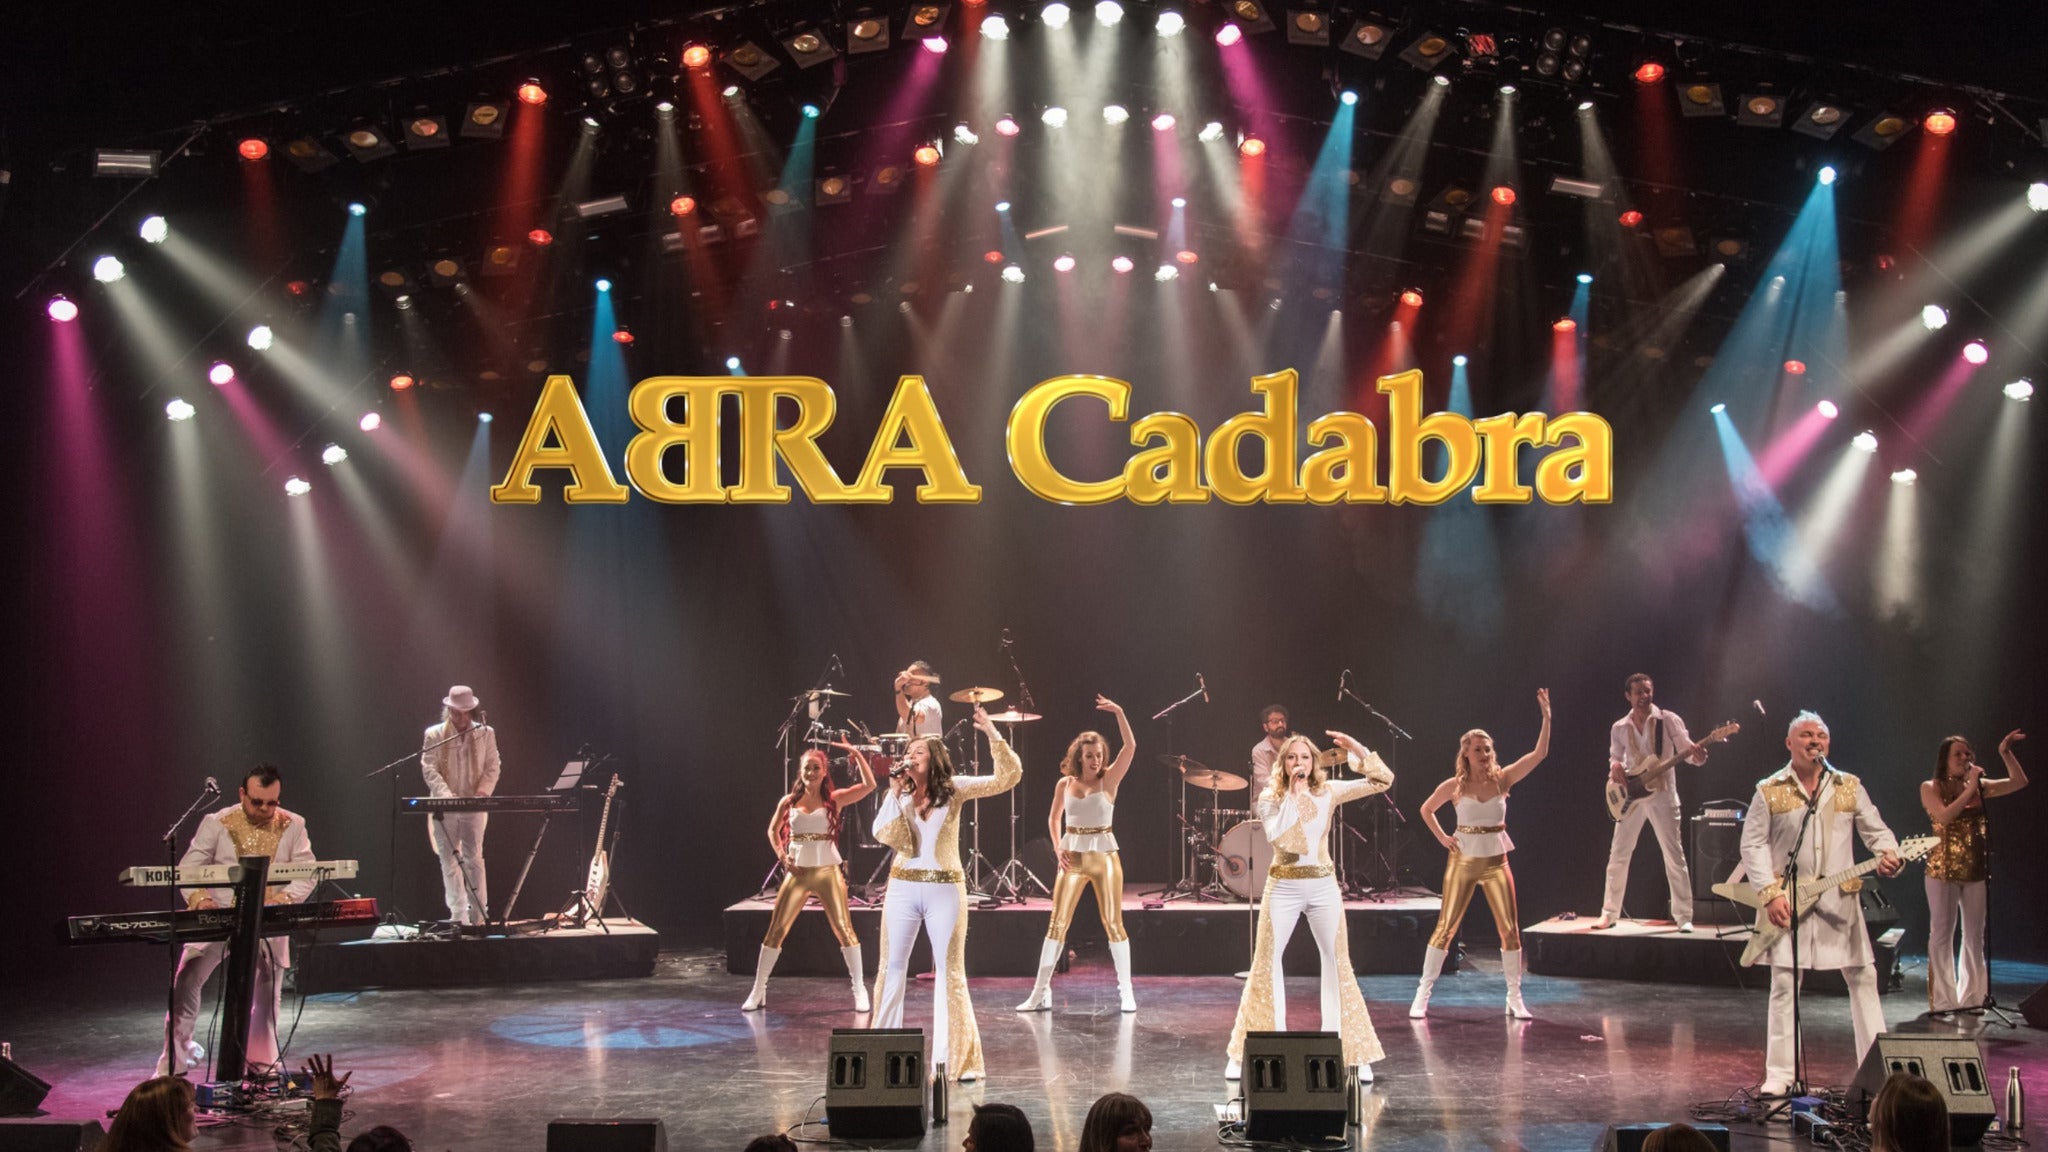 ABRA Cadabra - A Tribute To The Music And Magic Of Abba in Richmond event information